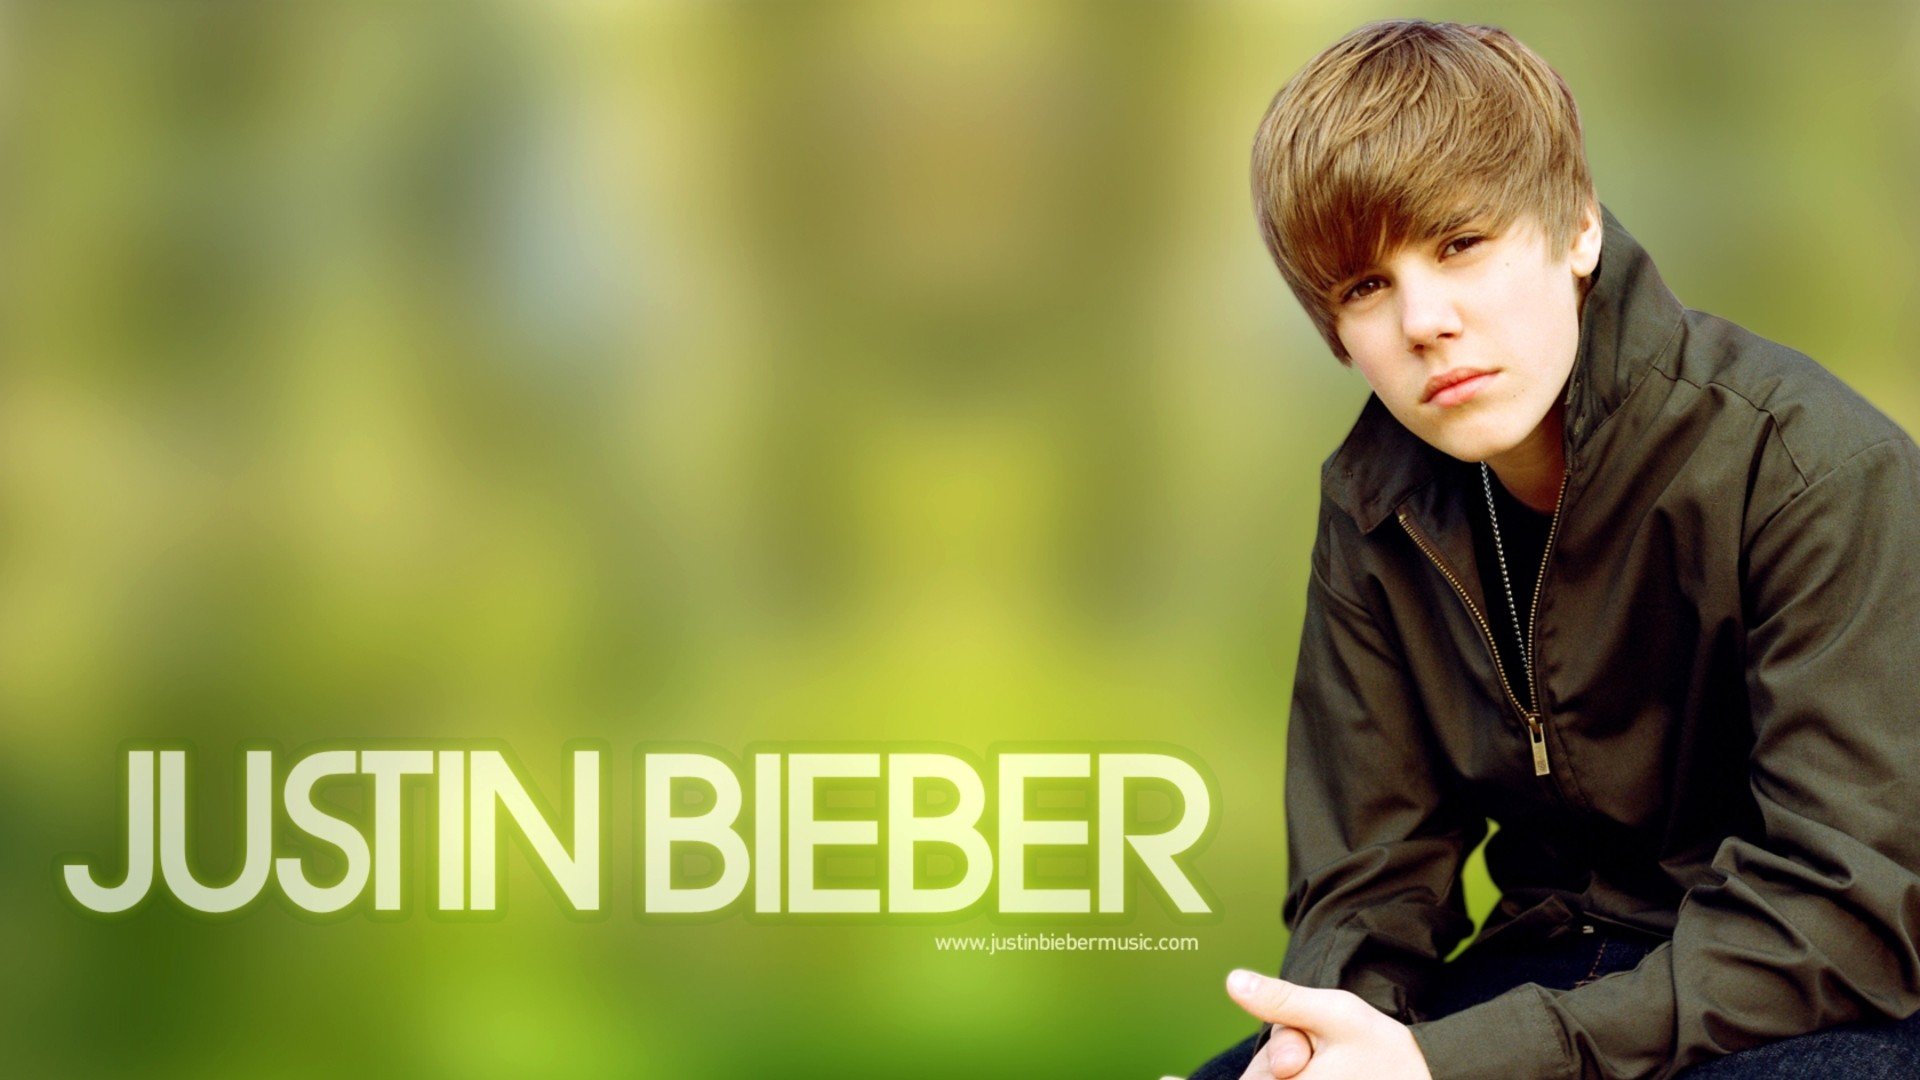 Free download Justin Bieber background ID:162402 hd 1920x1080 for computer